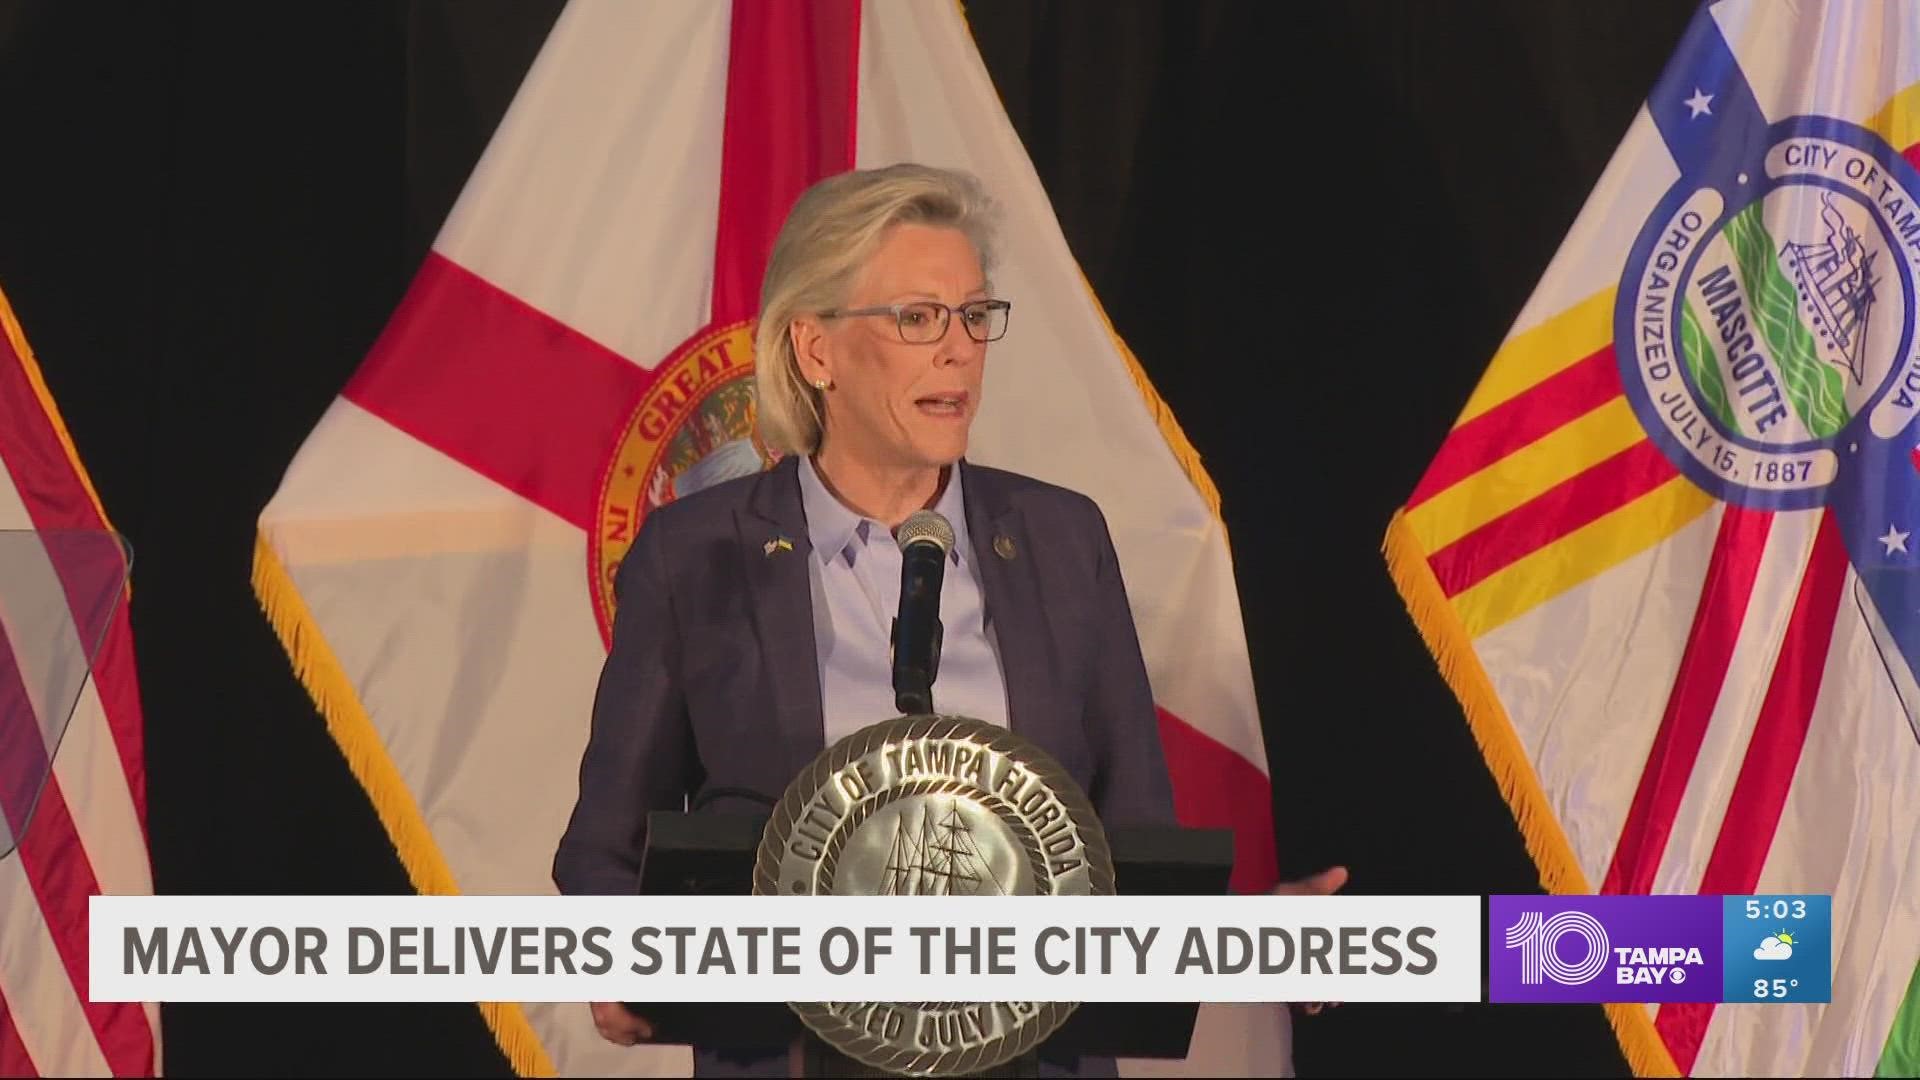 While mapping out the plan to move Tampa forward, the mayor included remarks on several topics.